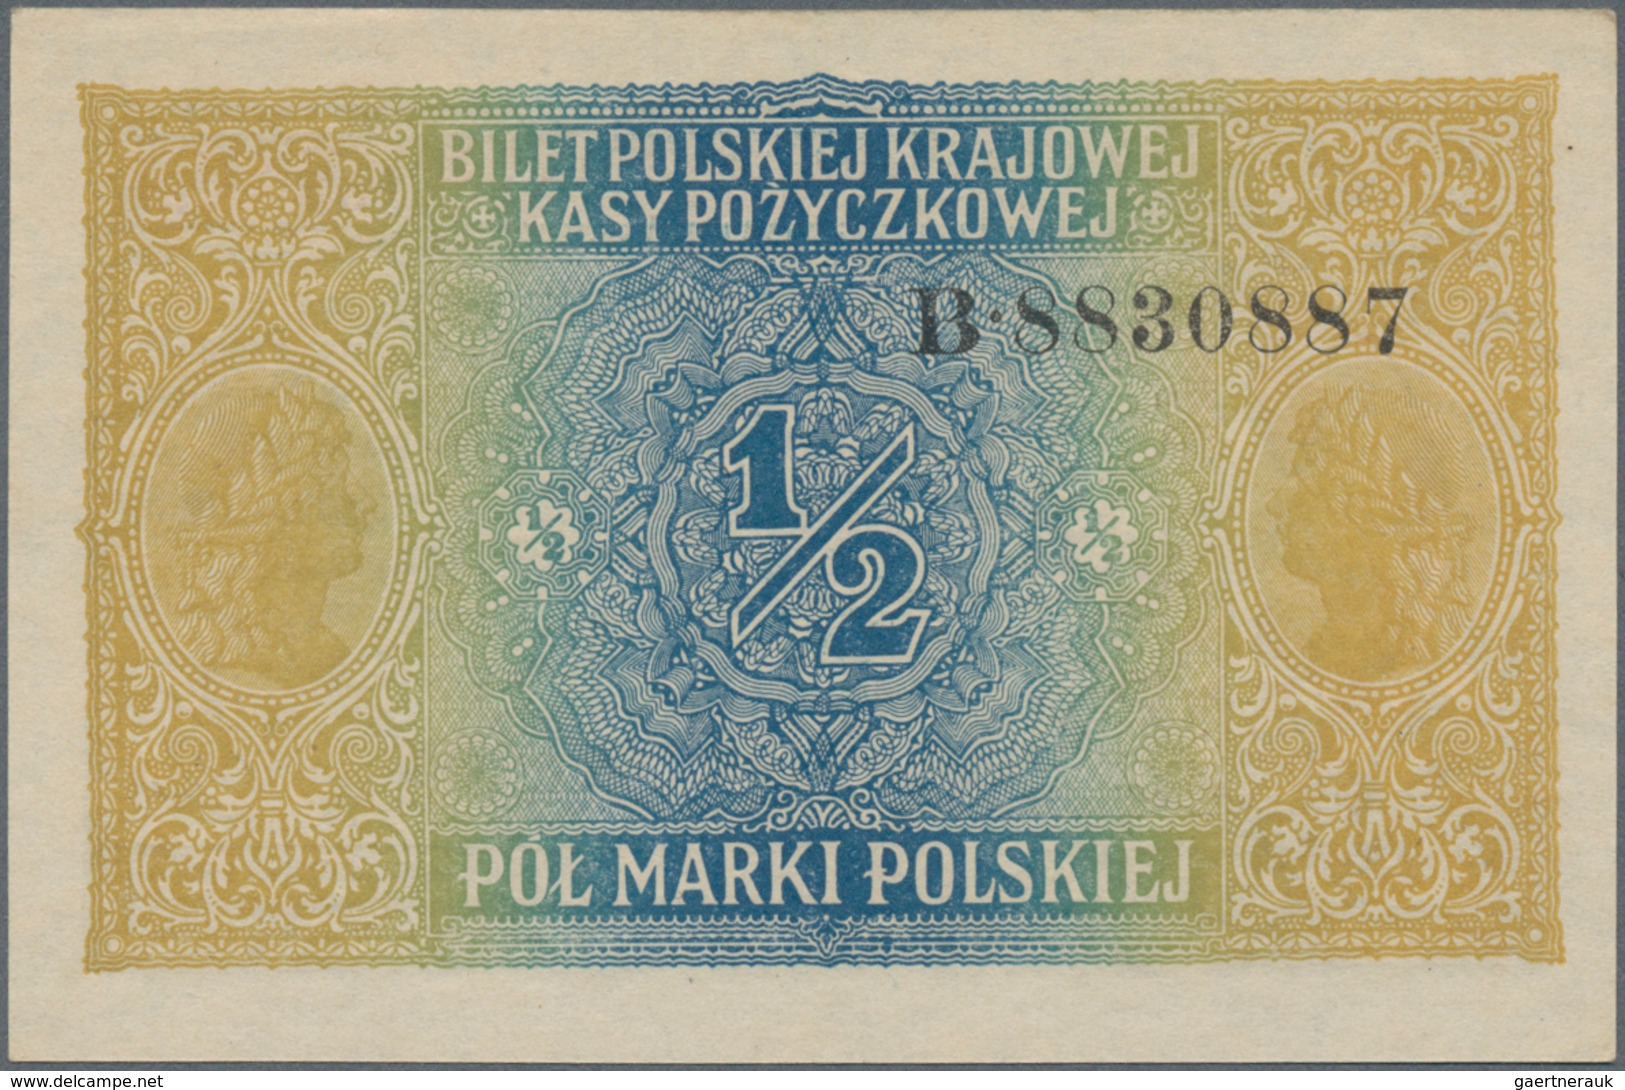 Poland / Polen: State Loan Bank of Poland set with 5 banknotes with title “Zarzad General Gubernator